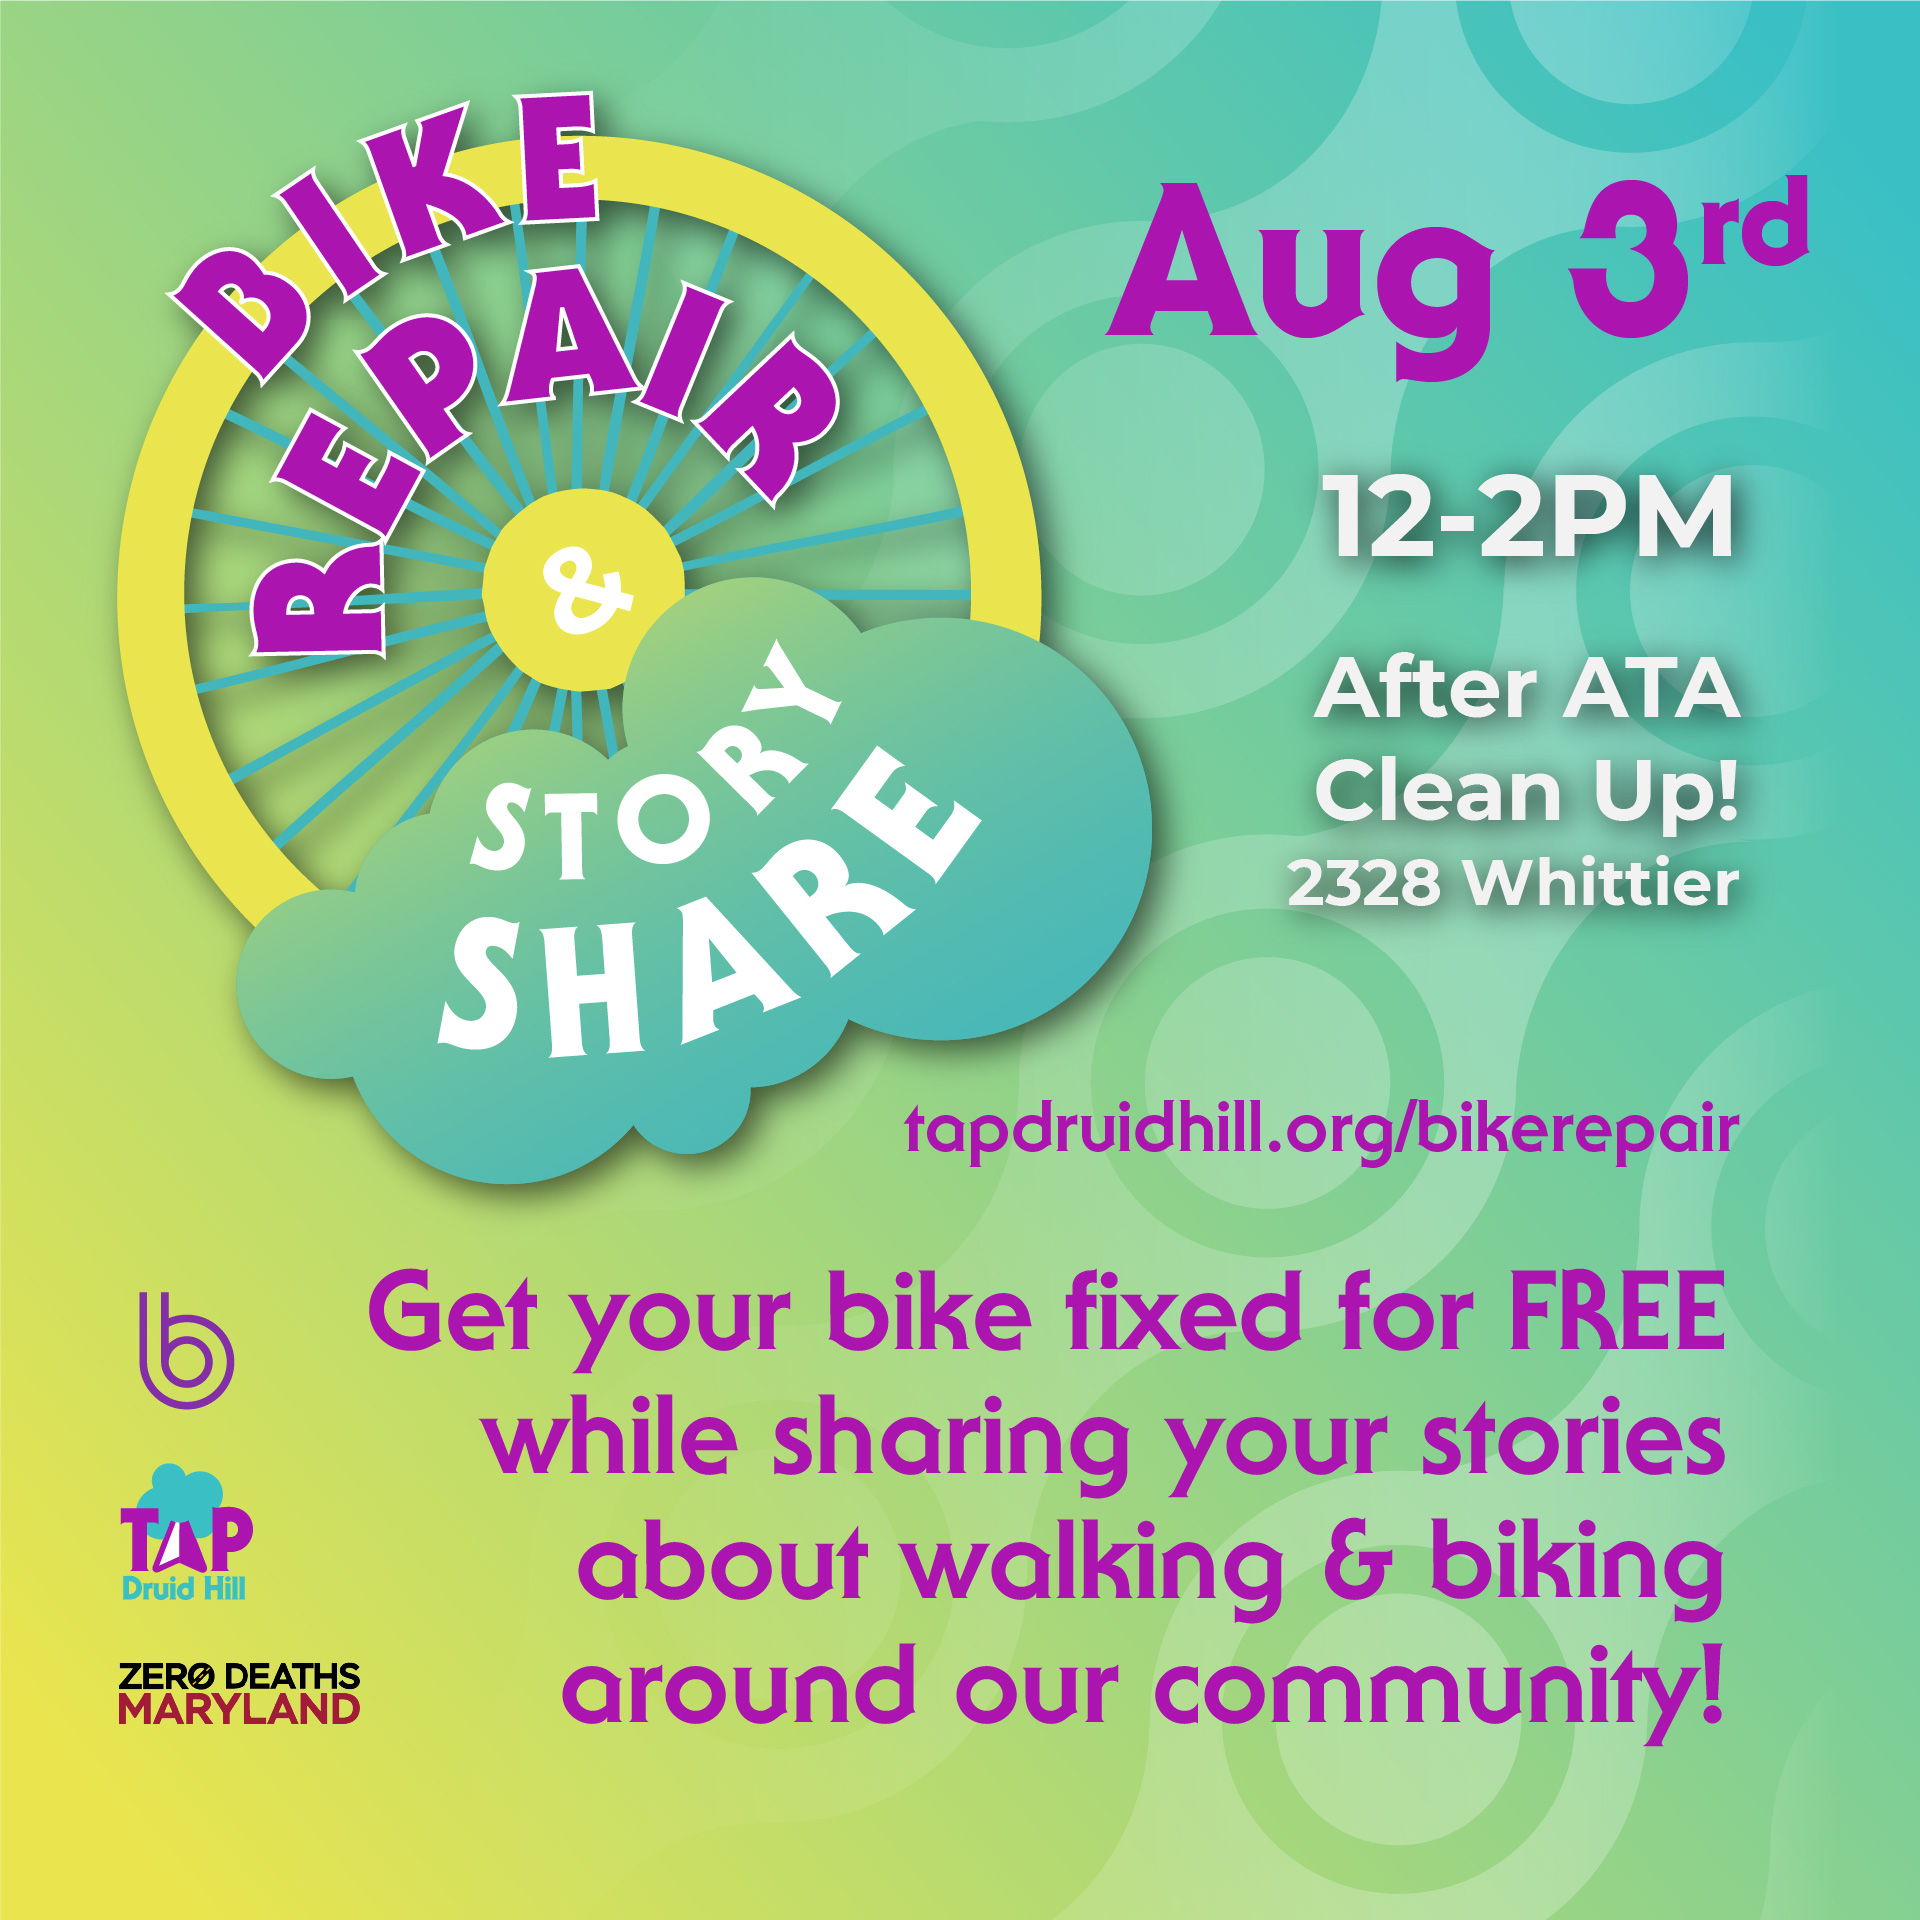 Bike Repair & Story Share banner inviting the readers to "Get your bike fixed for FREE while sharing your stories about walking & biking!" on August 3rd, 2024 3:30-7pm at the ATA Clean Up meeting at 2328 Whittier Ave